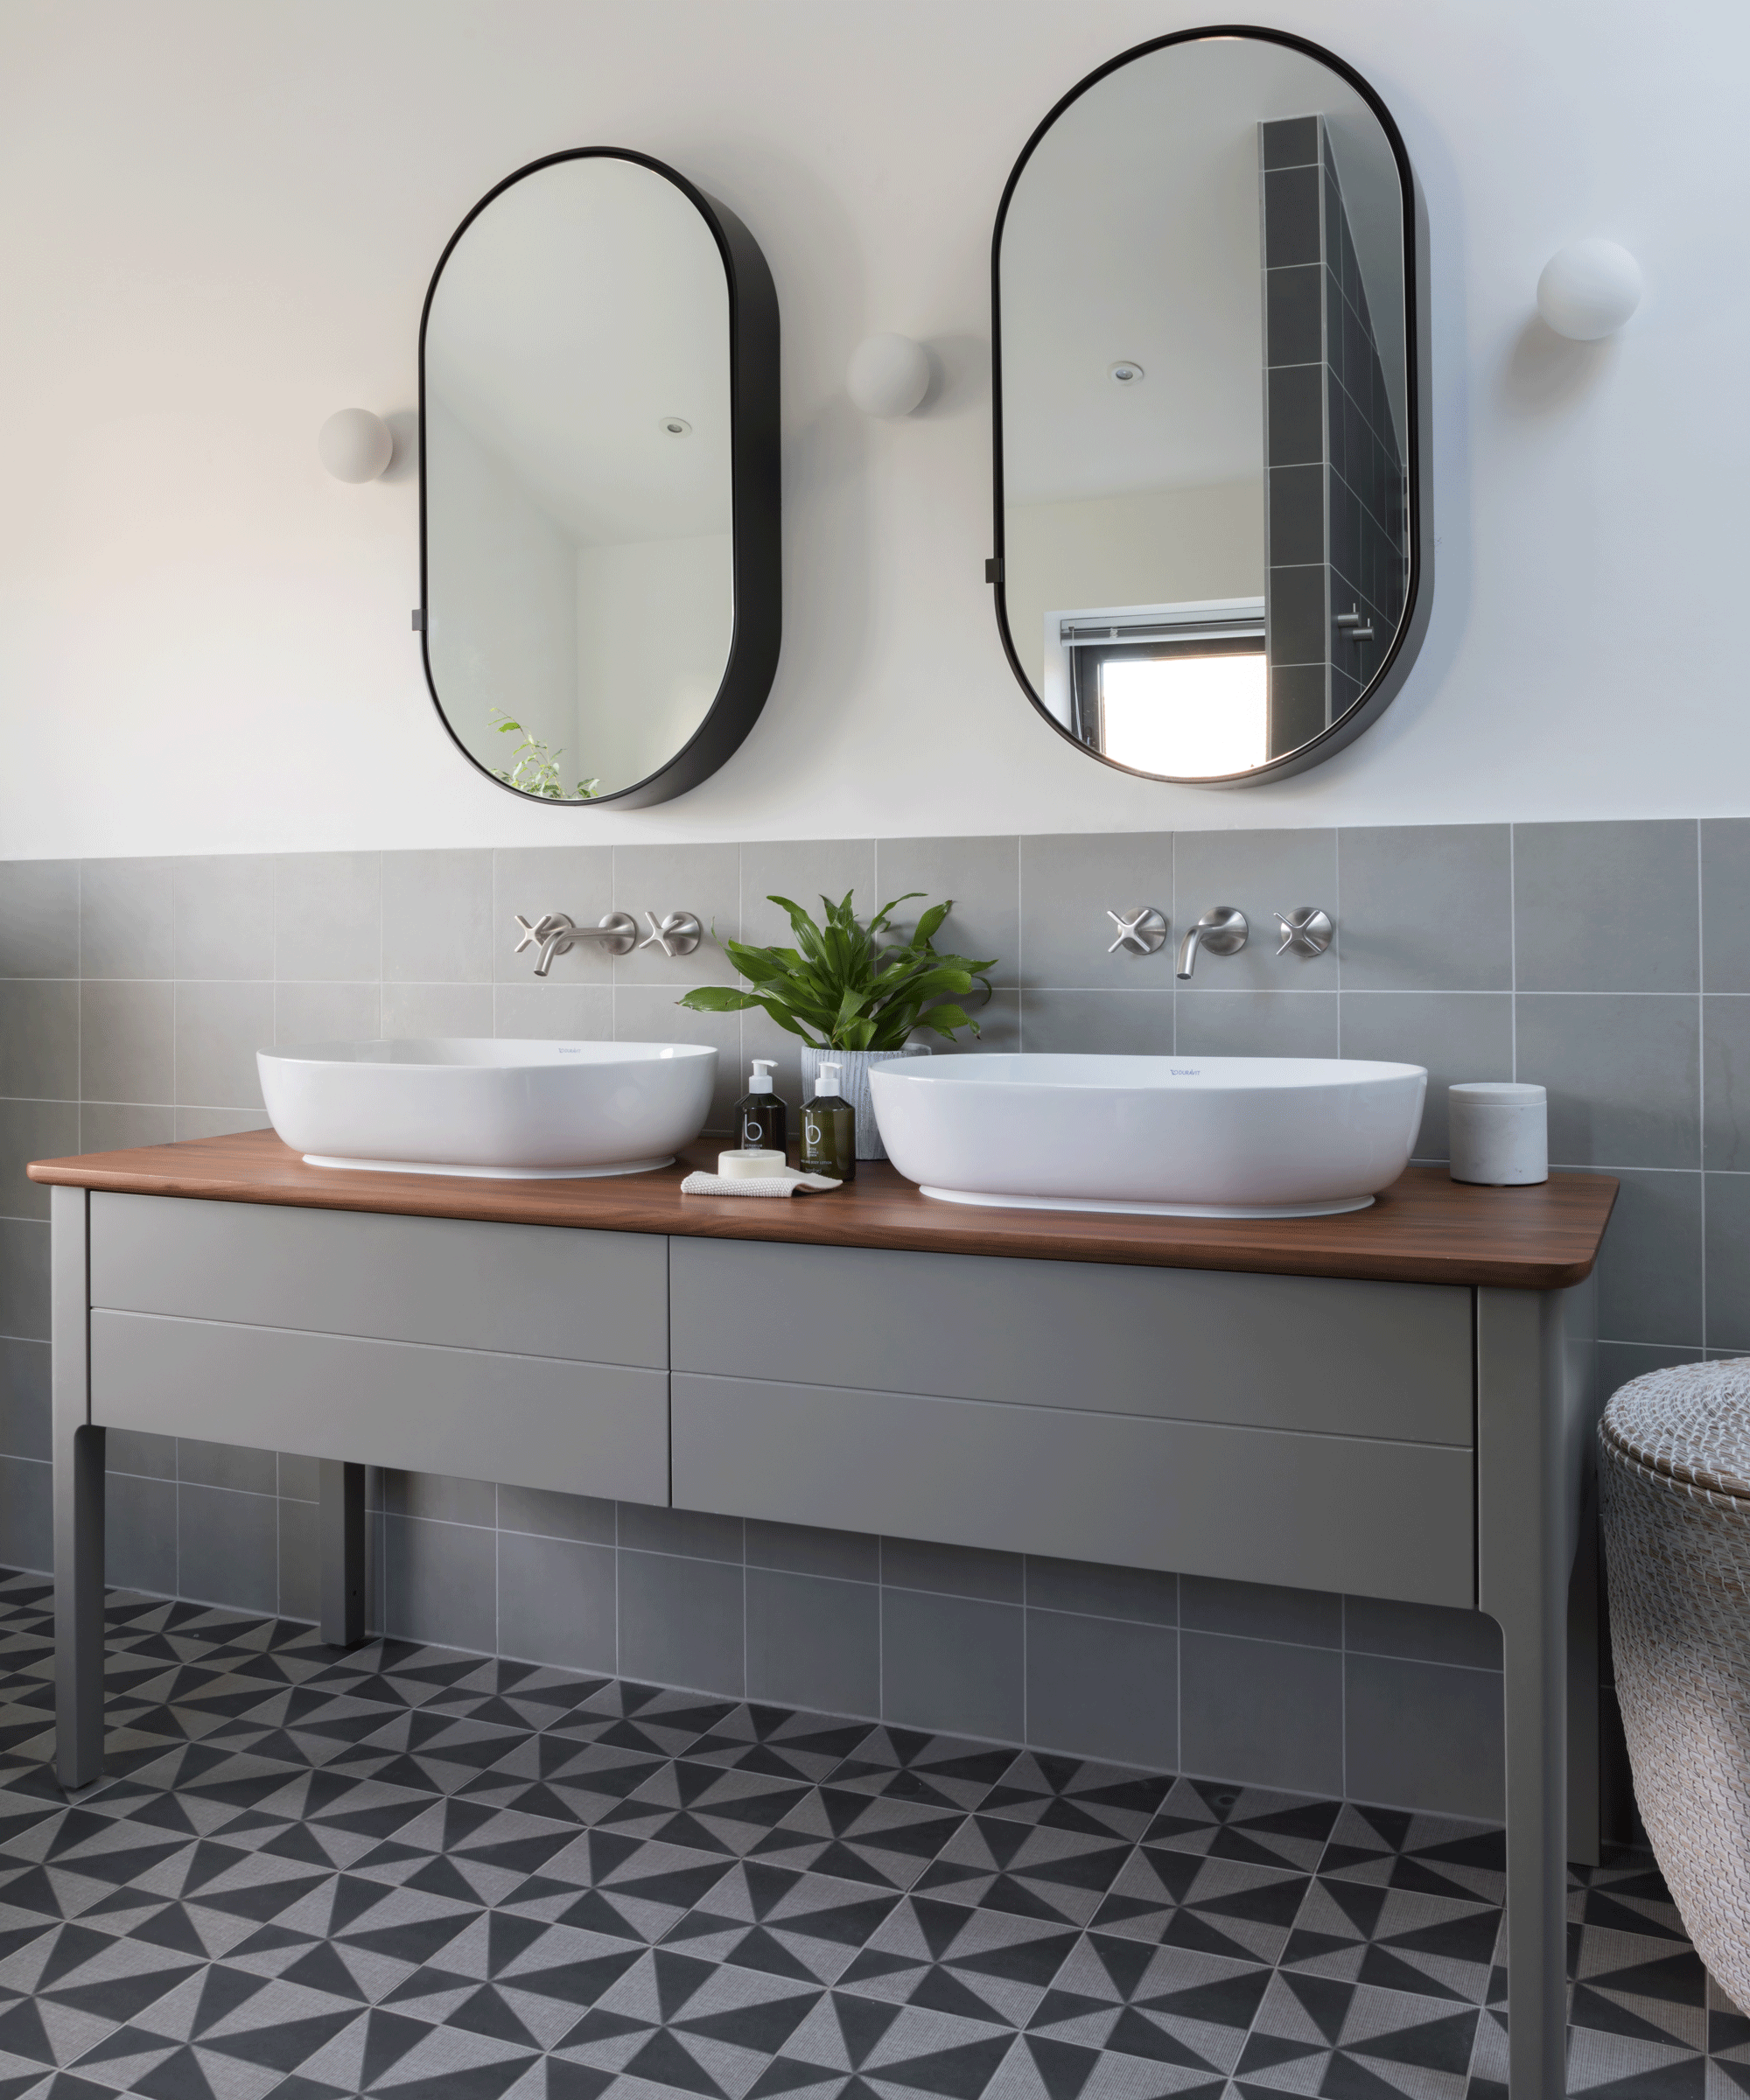 An example of bathroom vanity ideas showing a gray bathroom double vanity unit with white sinks and a gray and black mosaic tiled floor